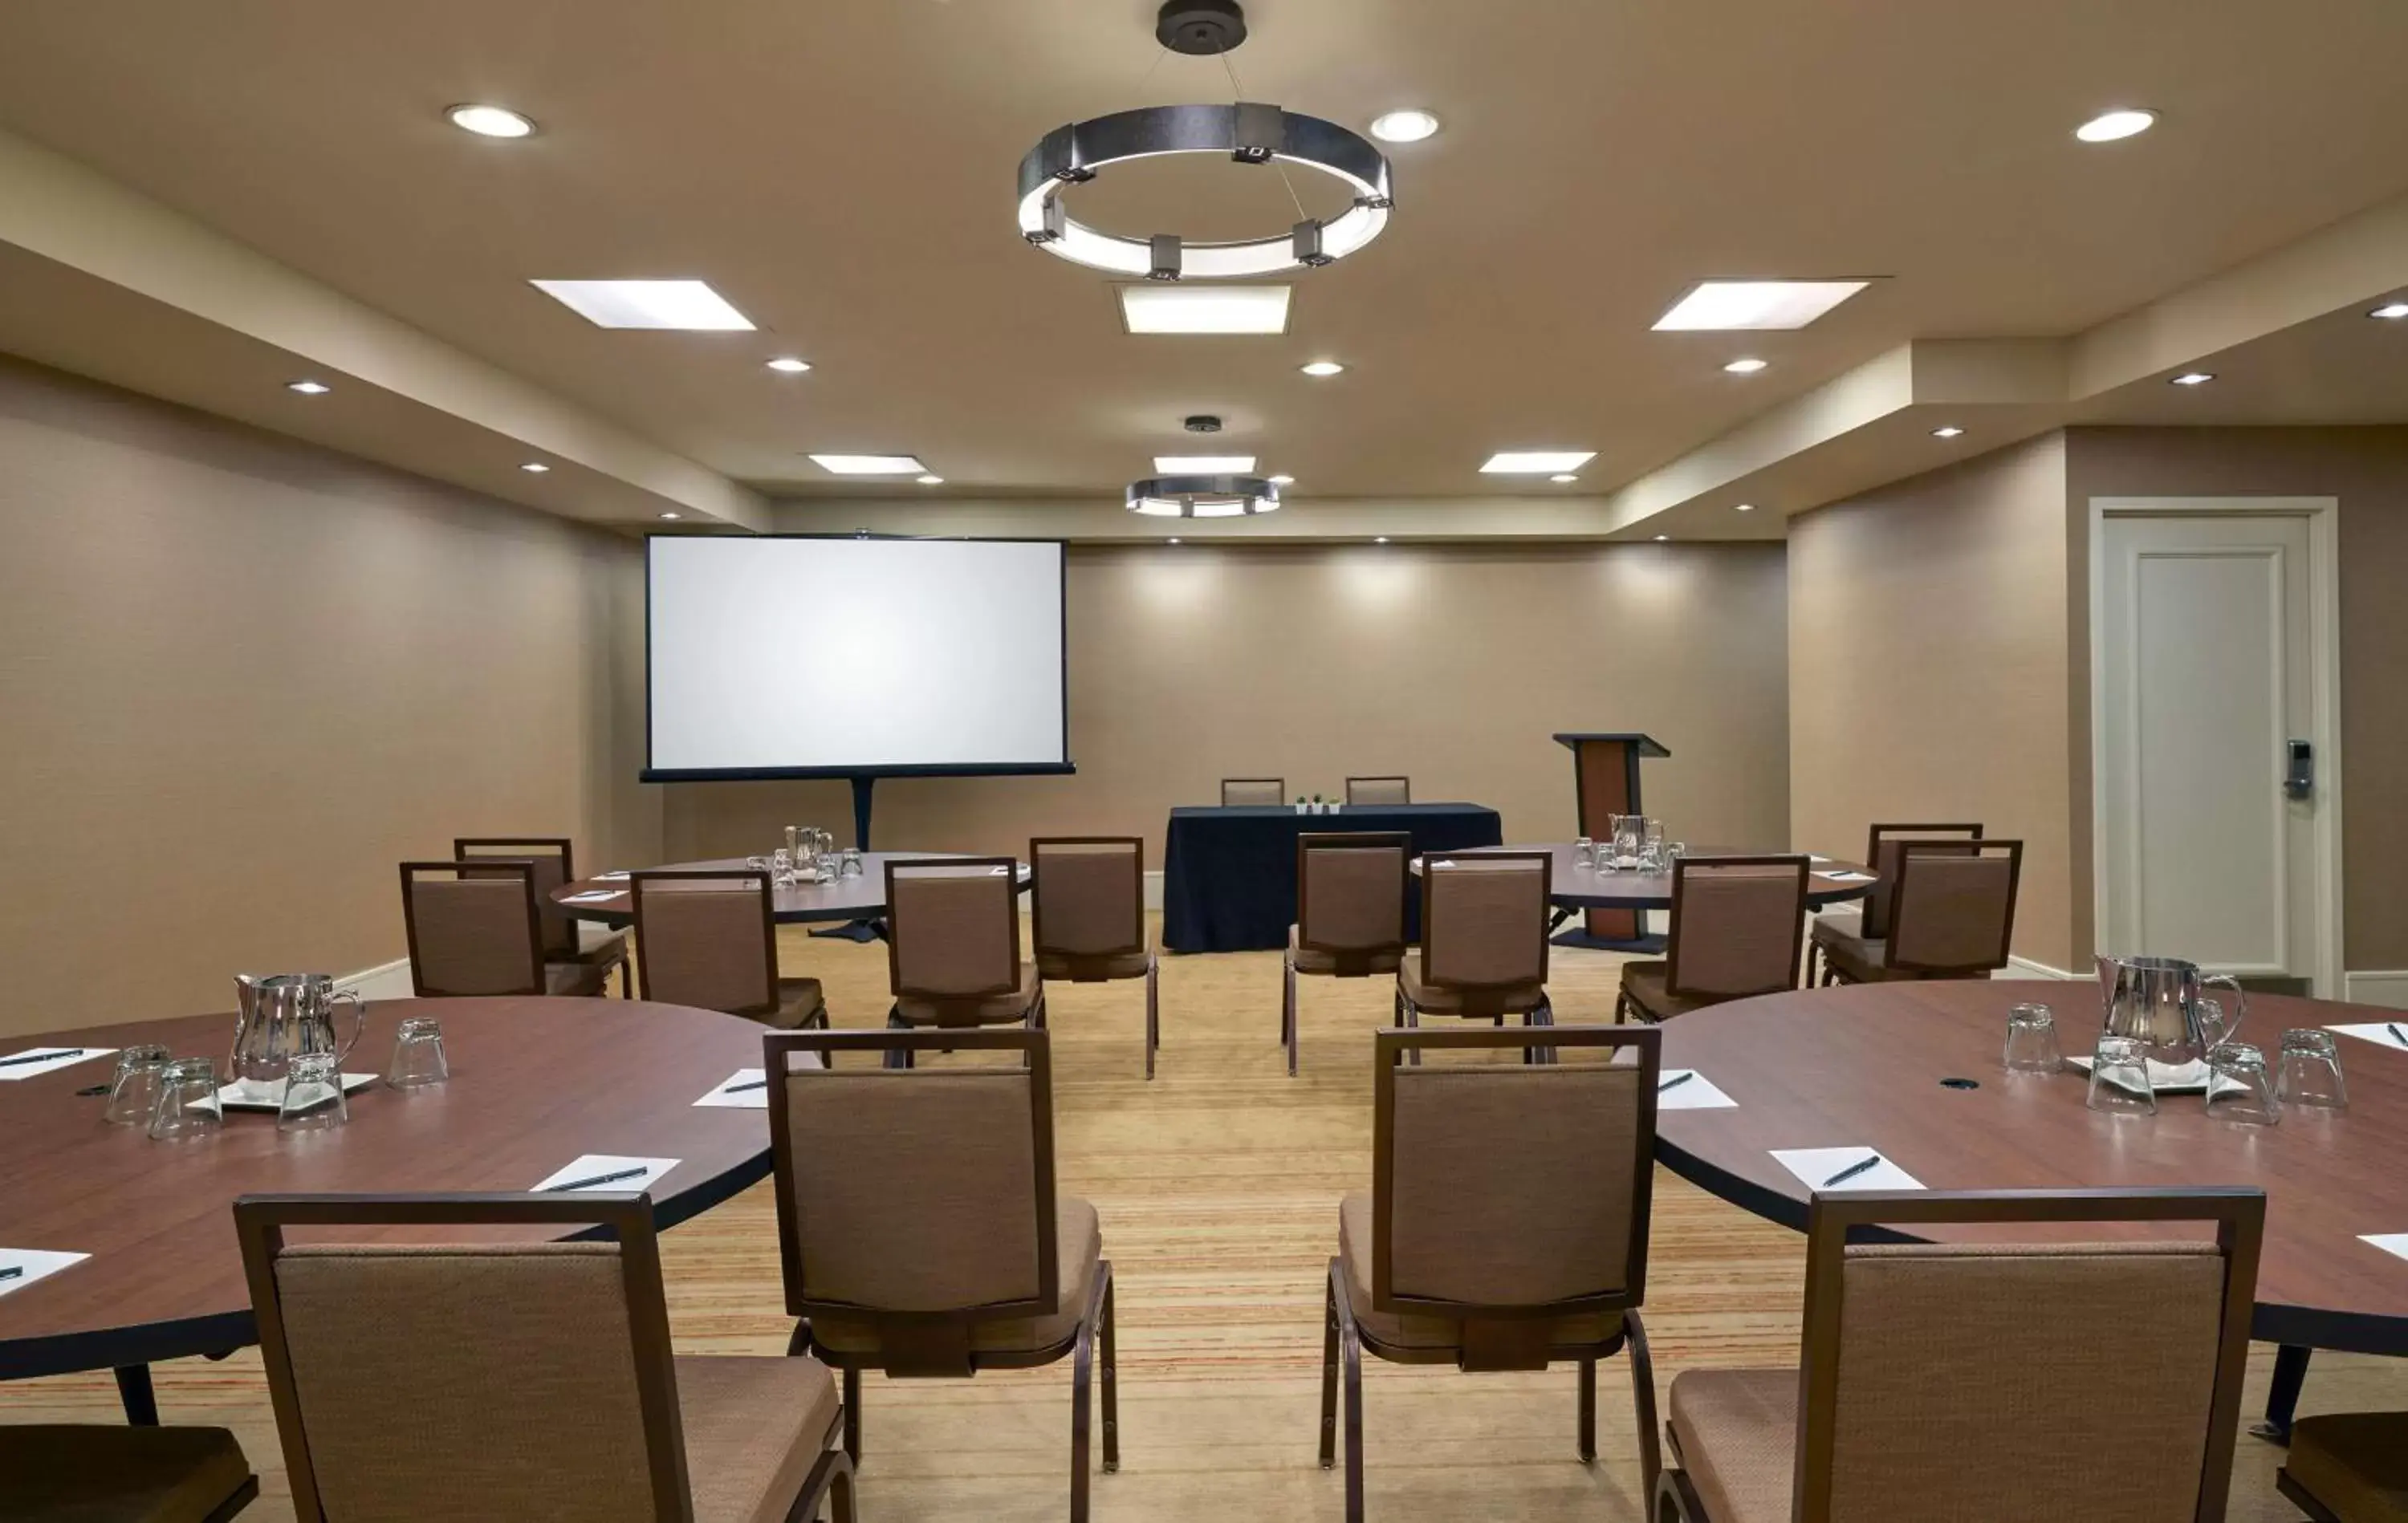 Meeting/conference room in Hilton Denver City Center